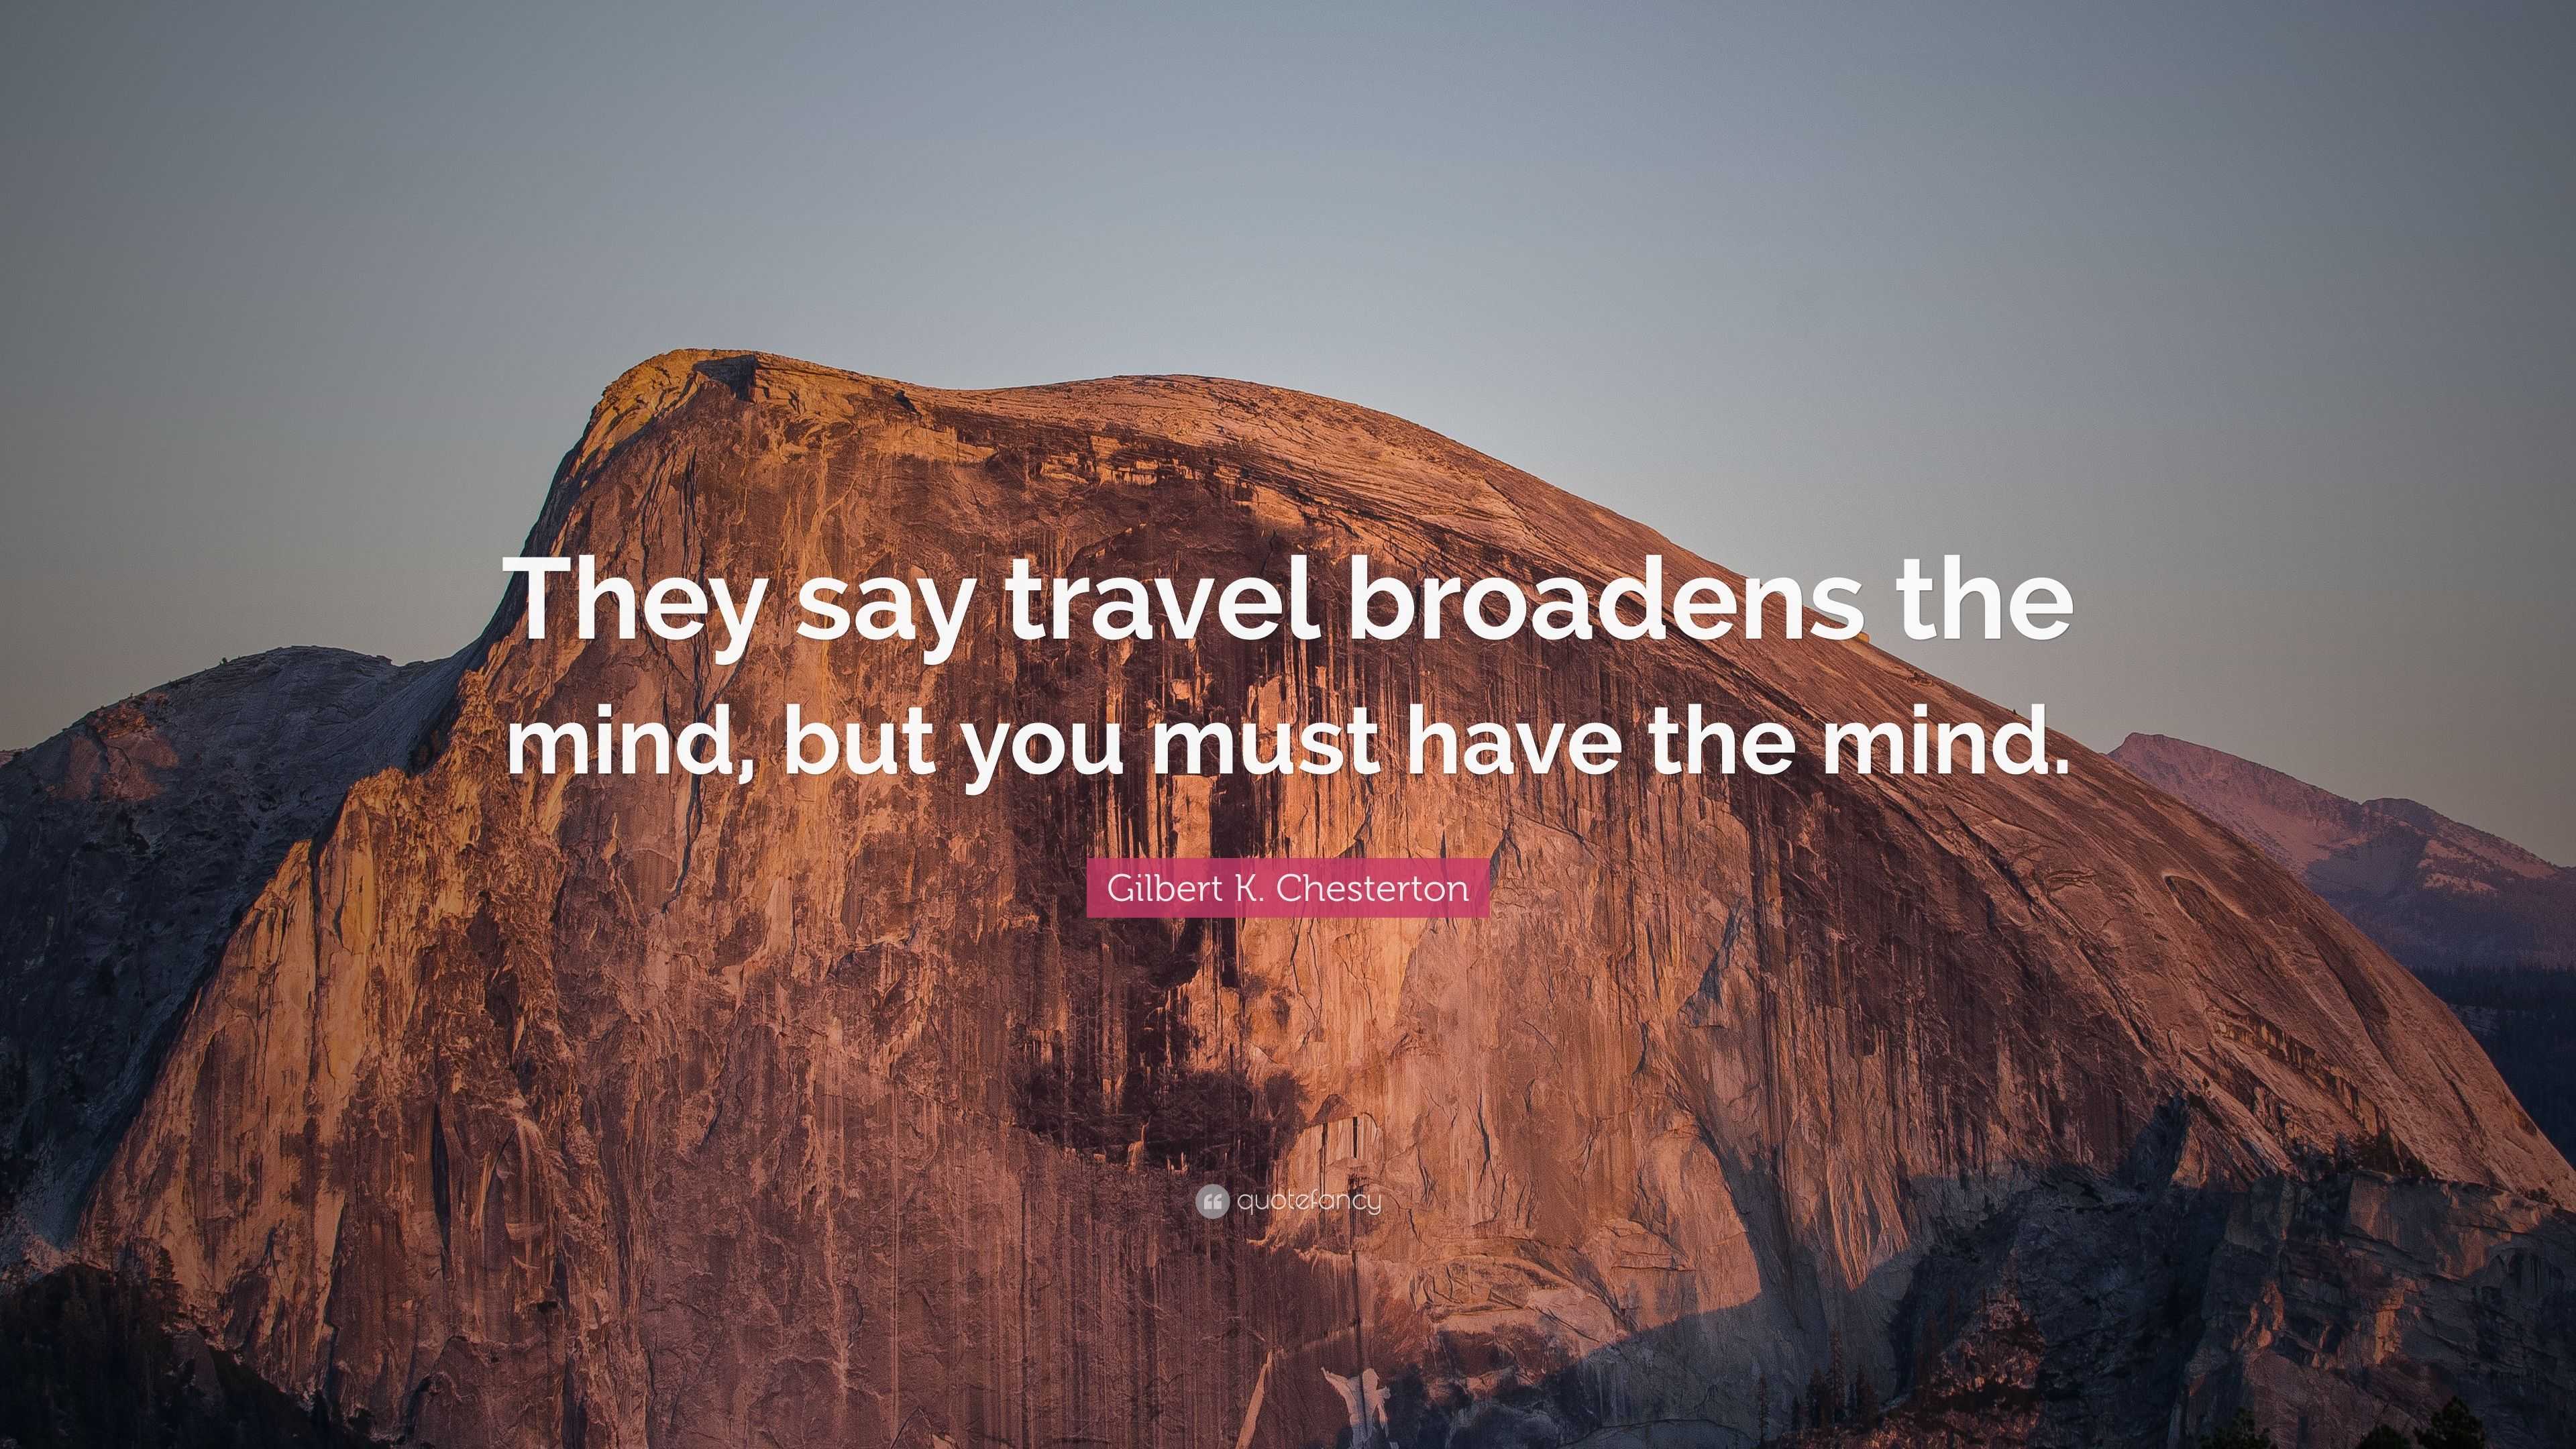 travel broadens the mind. what is your view